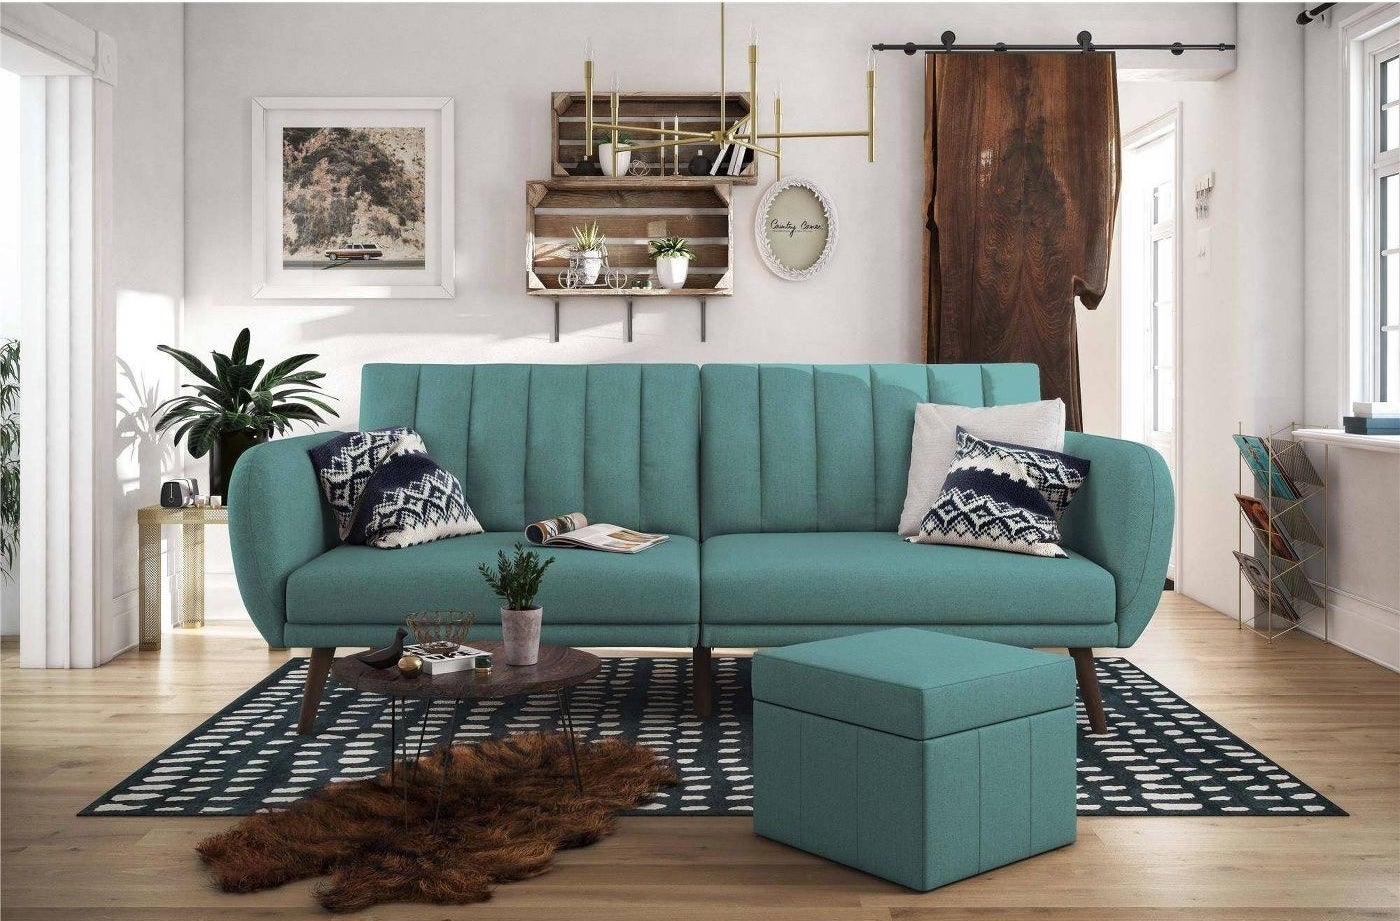 The sofa in teal